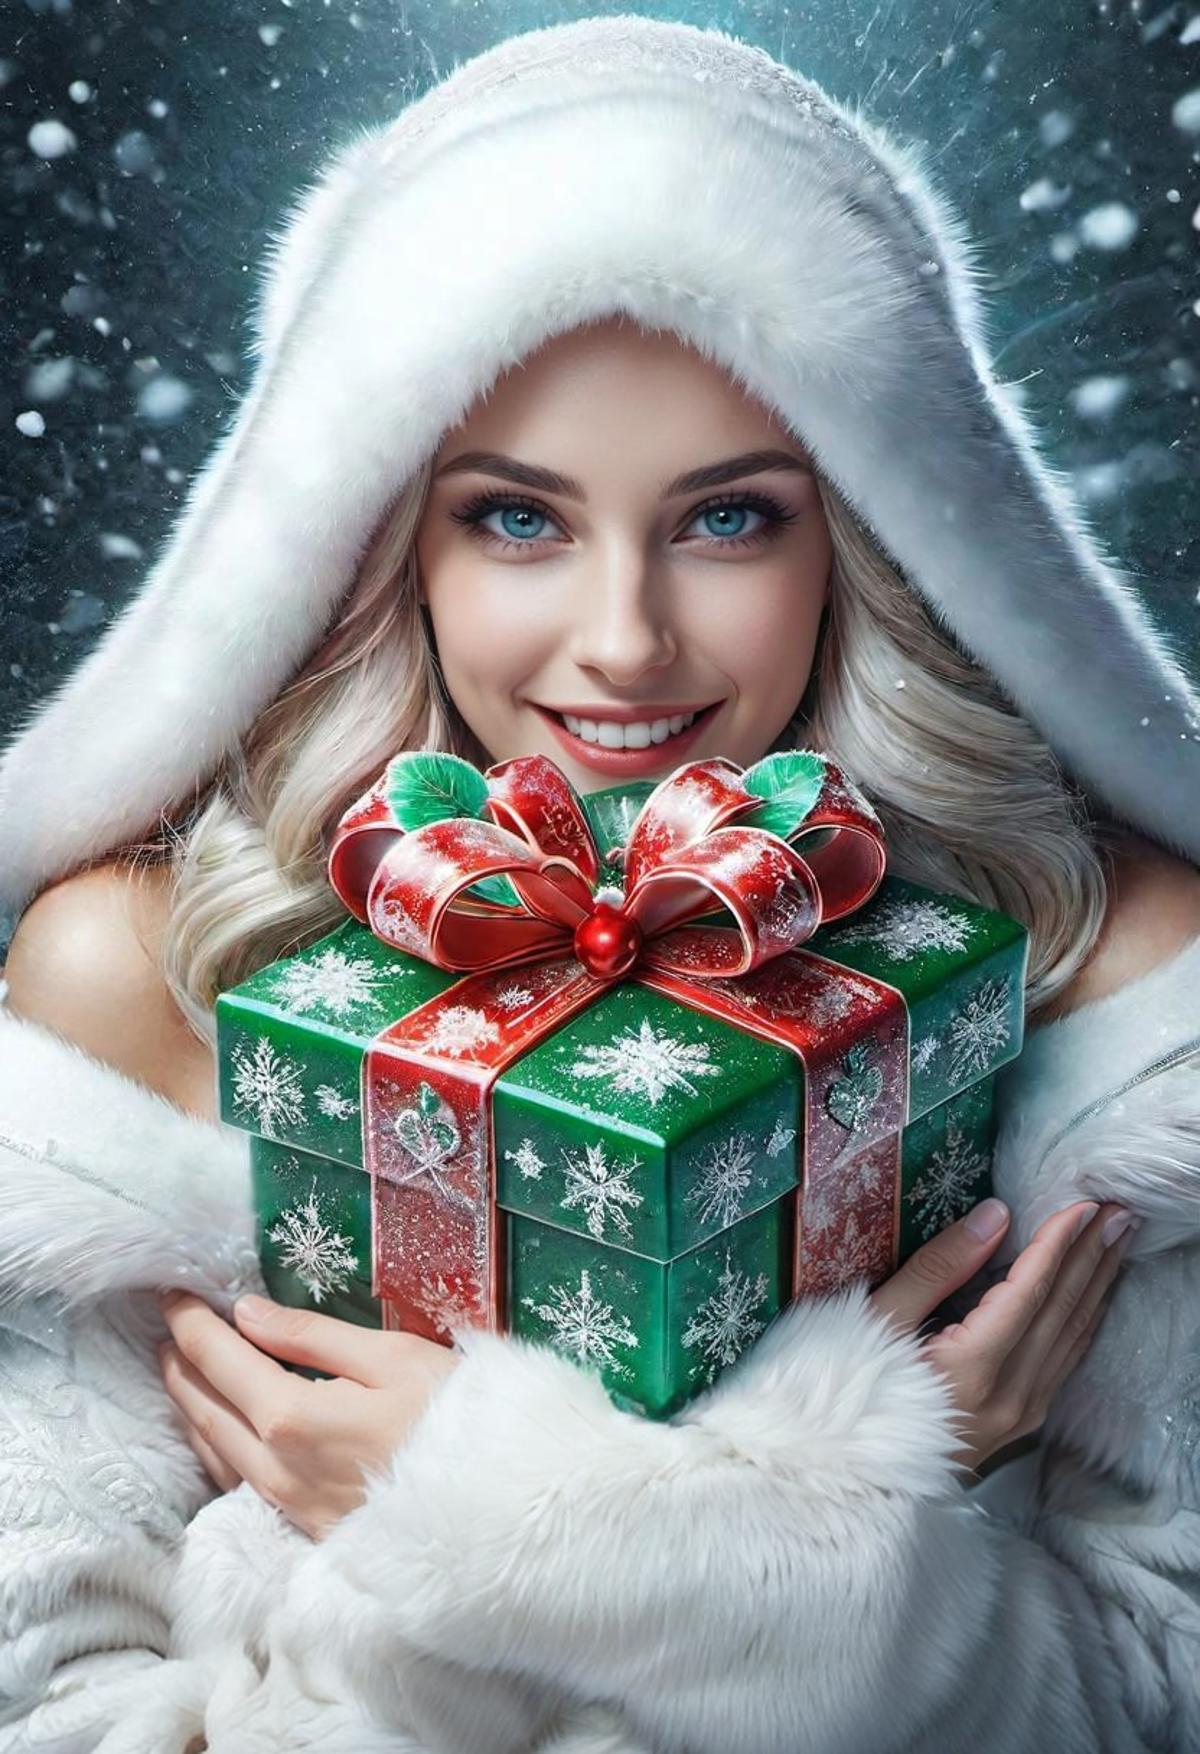 A beautiful white-haired woman with blue eyes is holding a brightly colored Christmas gift.